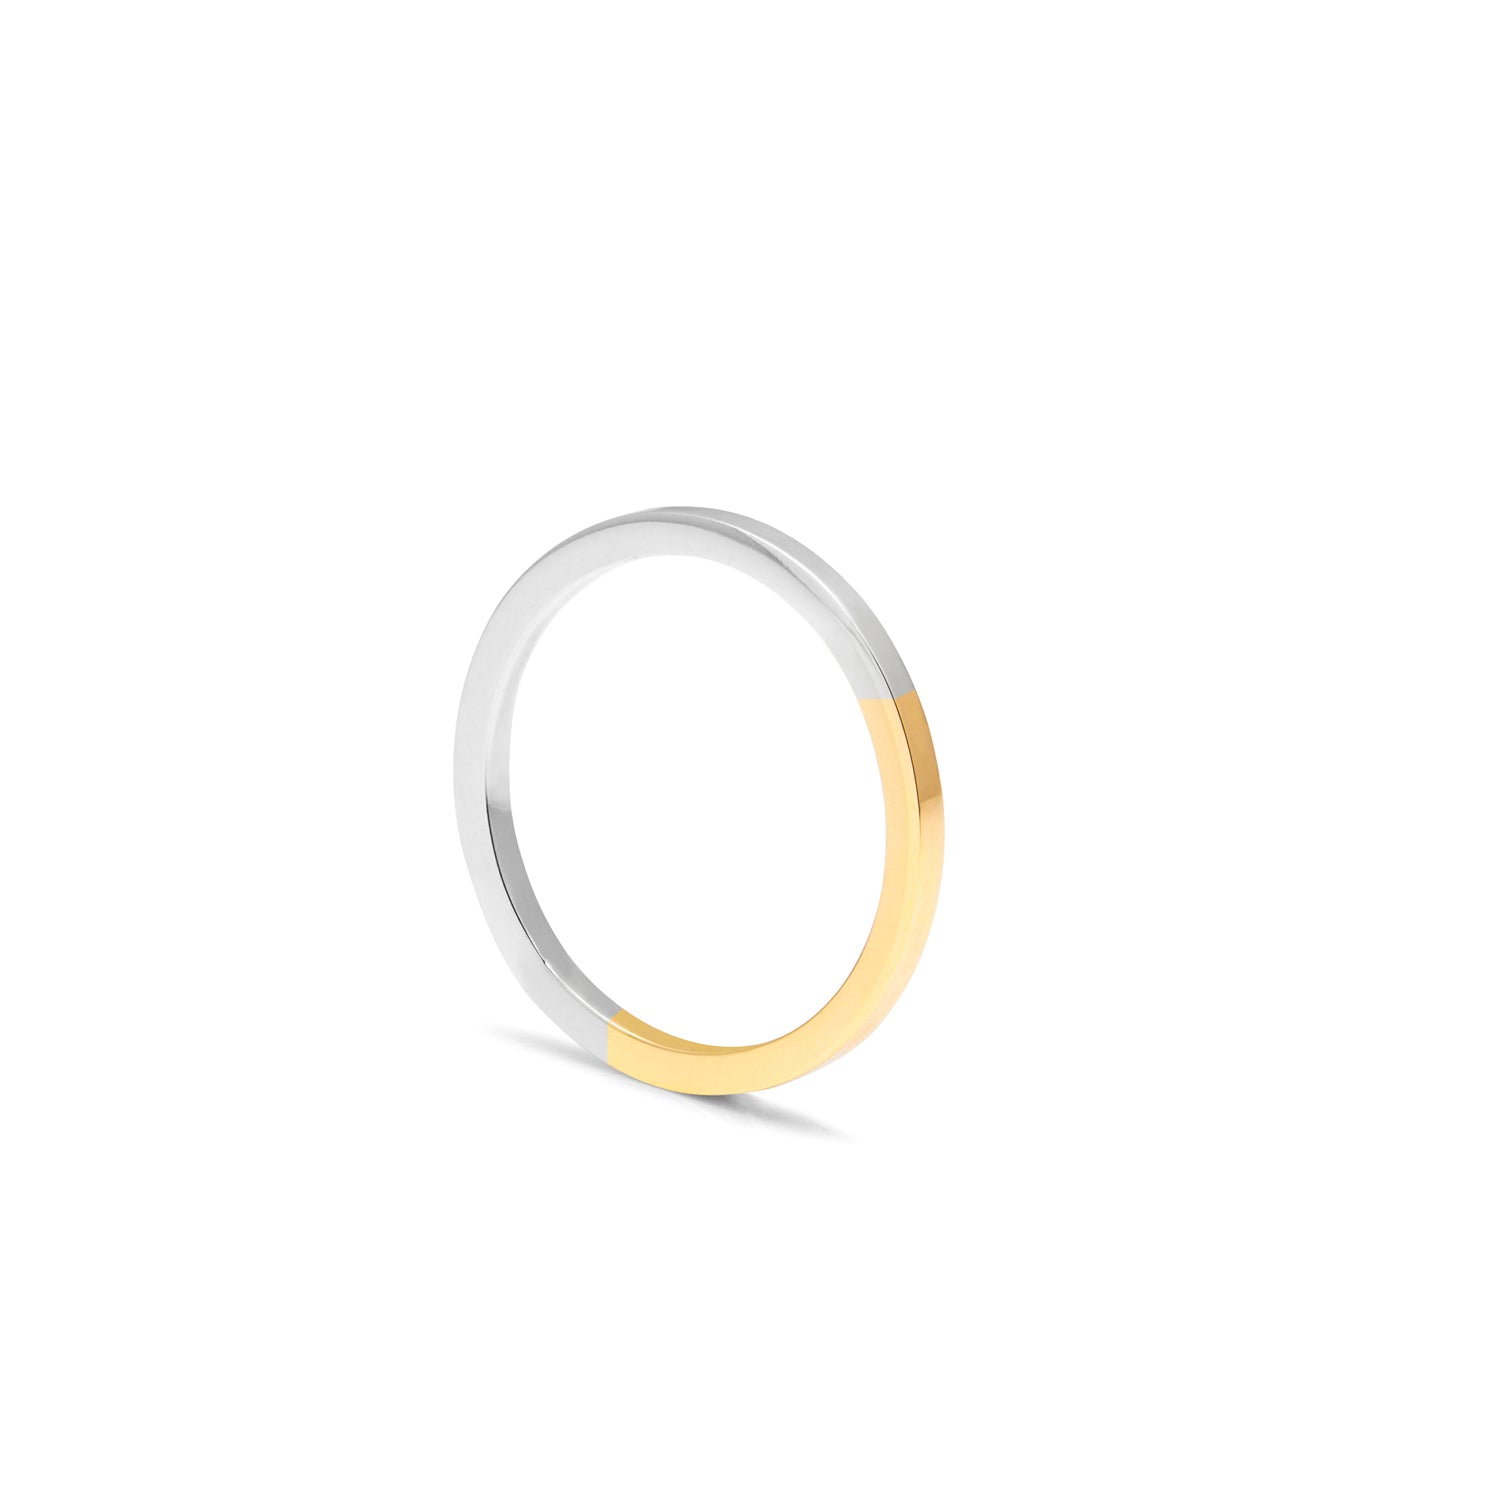 Golden Ratio Square Ring - 9k Yellow Gold & Silver